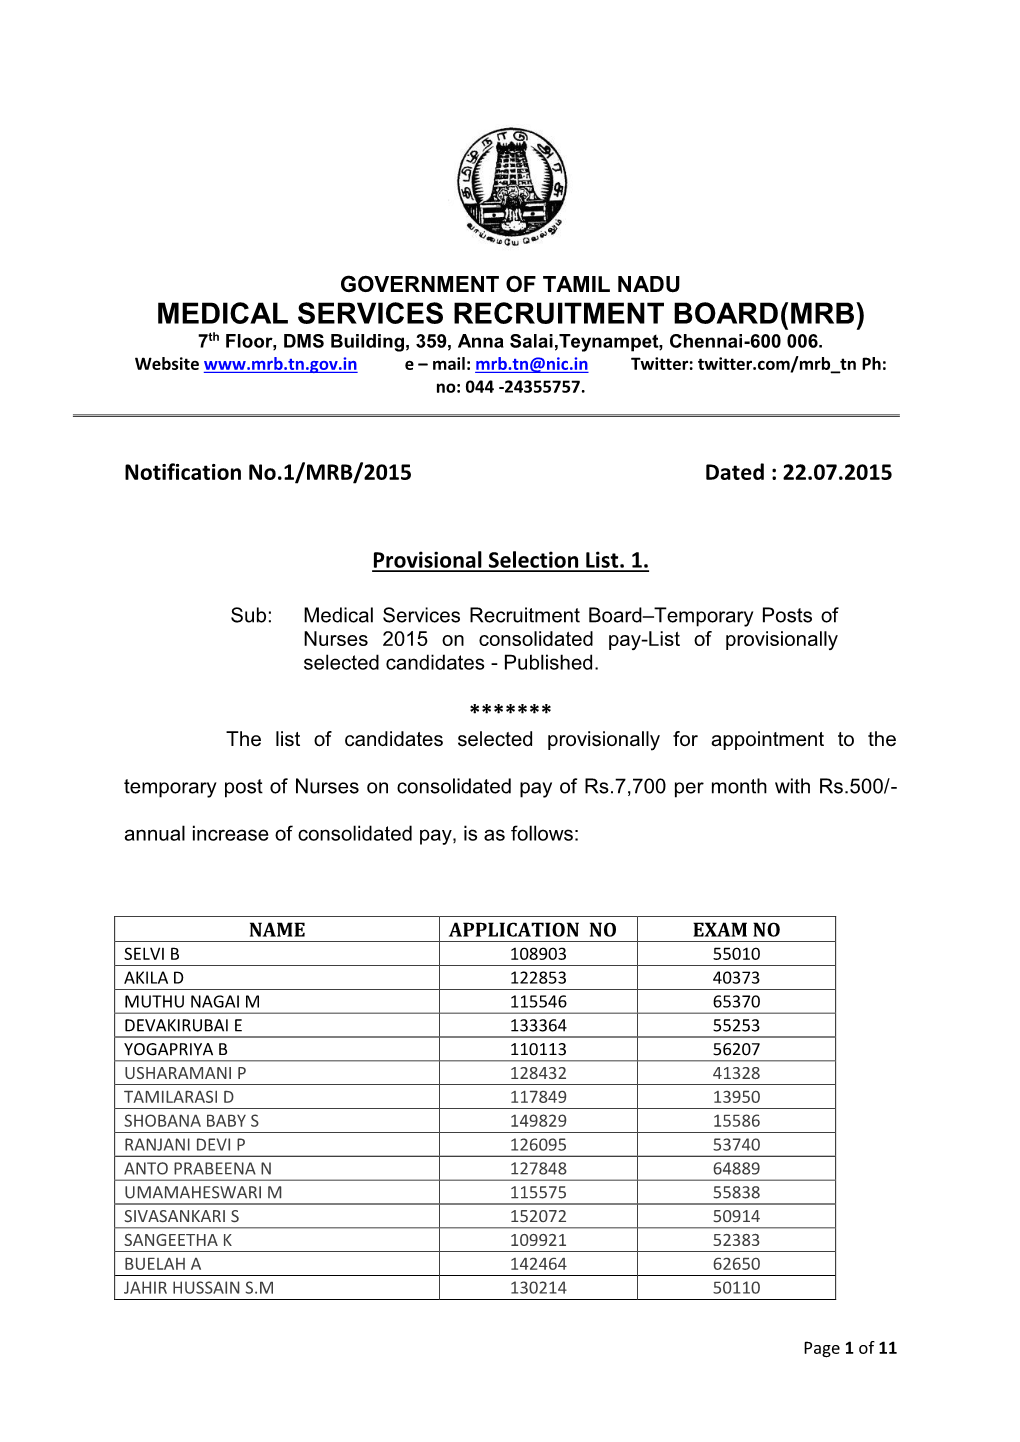 Provisional Selection List No. 1 for the Post of Nurses, 2015